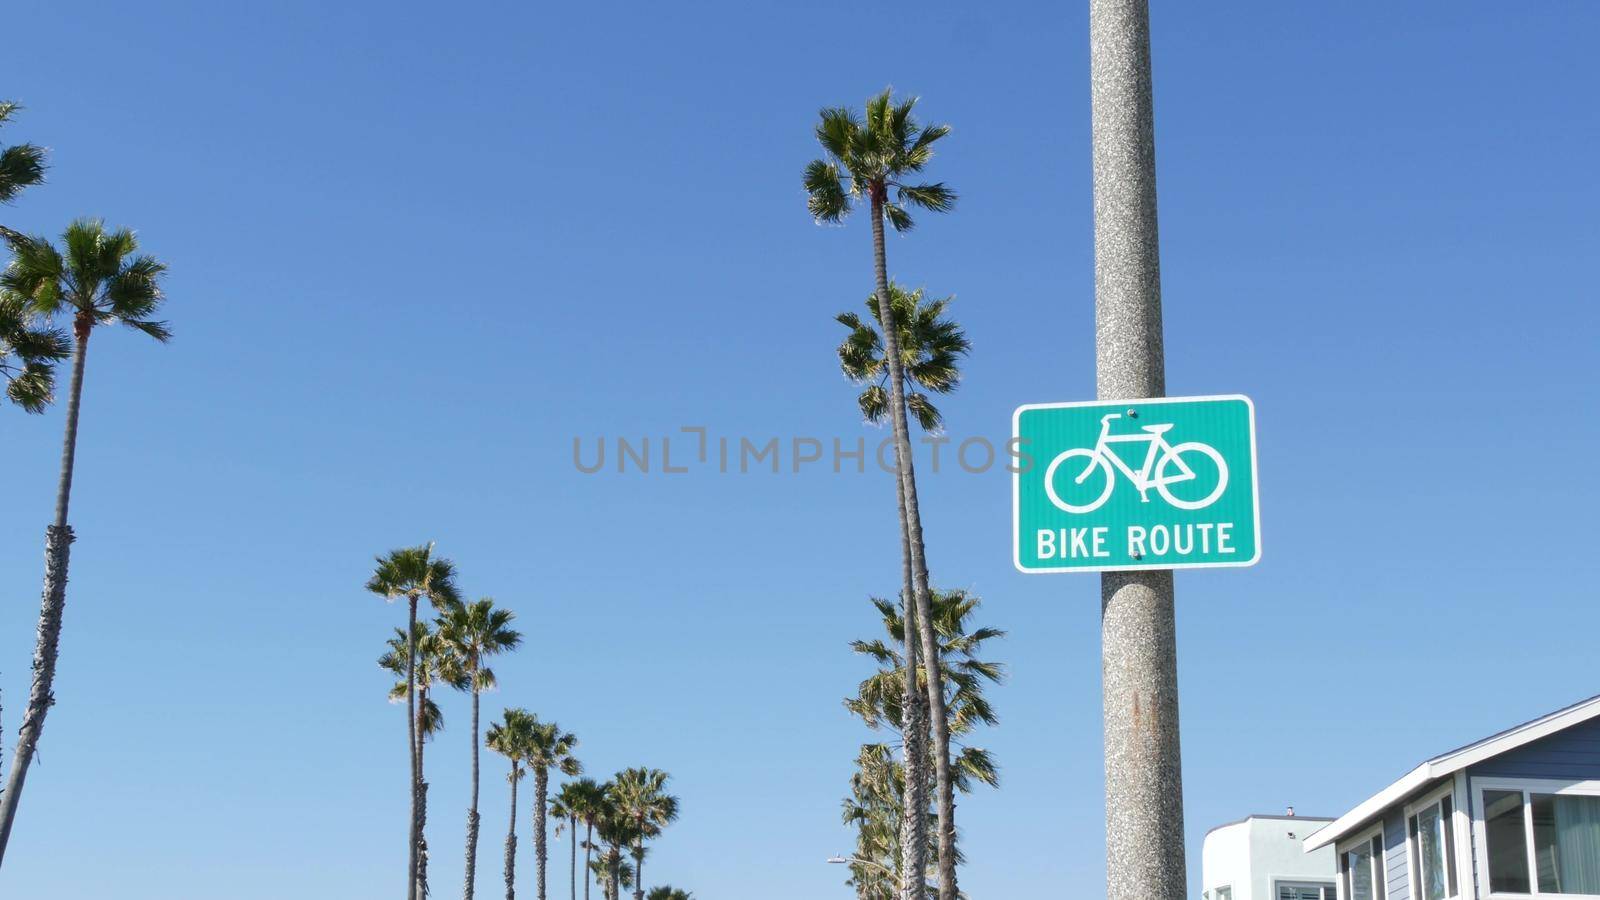 Bike Route green road sign in California, USA. Bicycle lane singpost. Bikeway in Oceanside pacific tourist resort. Cycleway signboard and palm. Healthy lifestyle, recreation and safety cycling symbol.